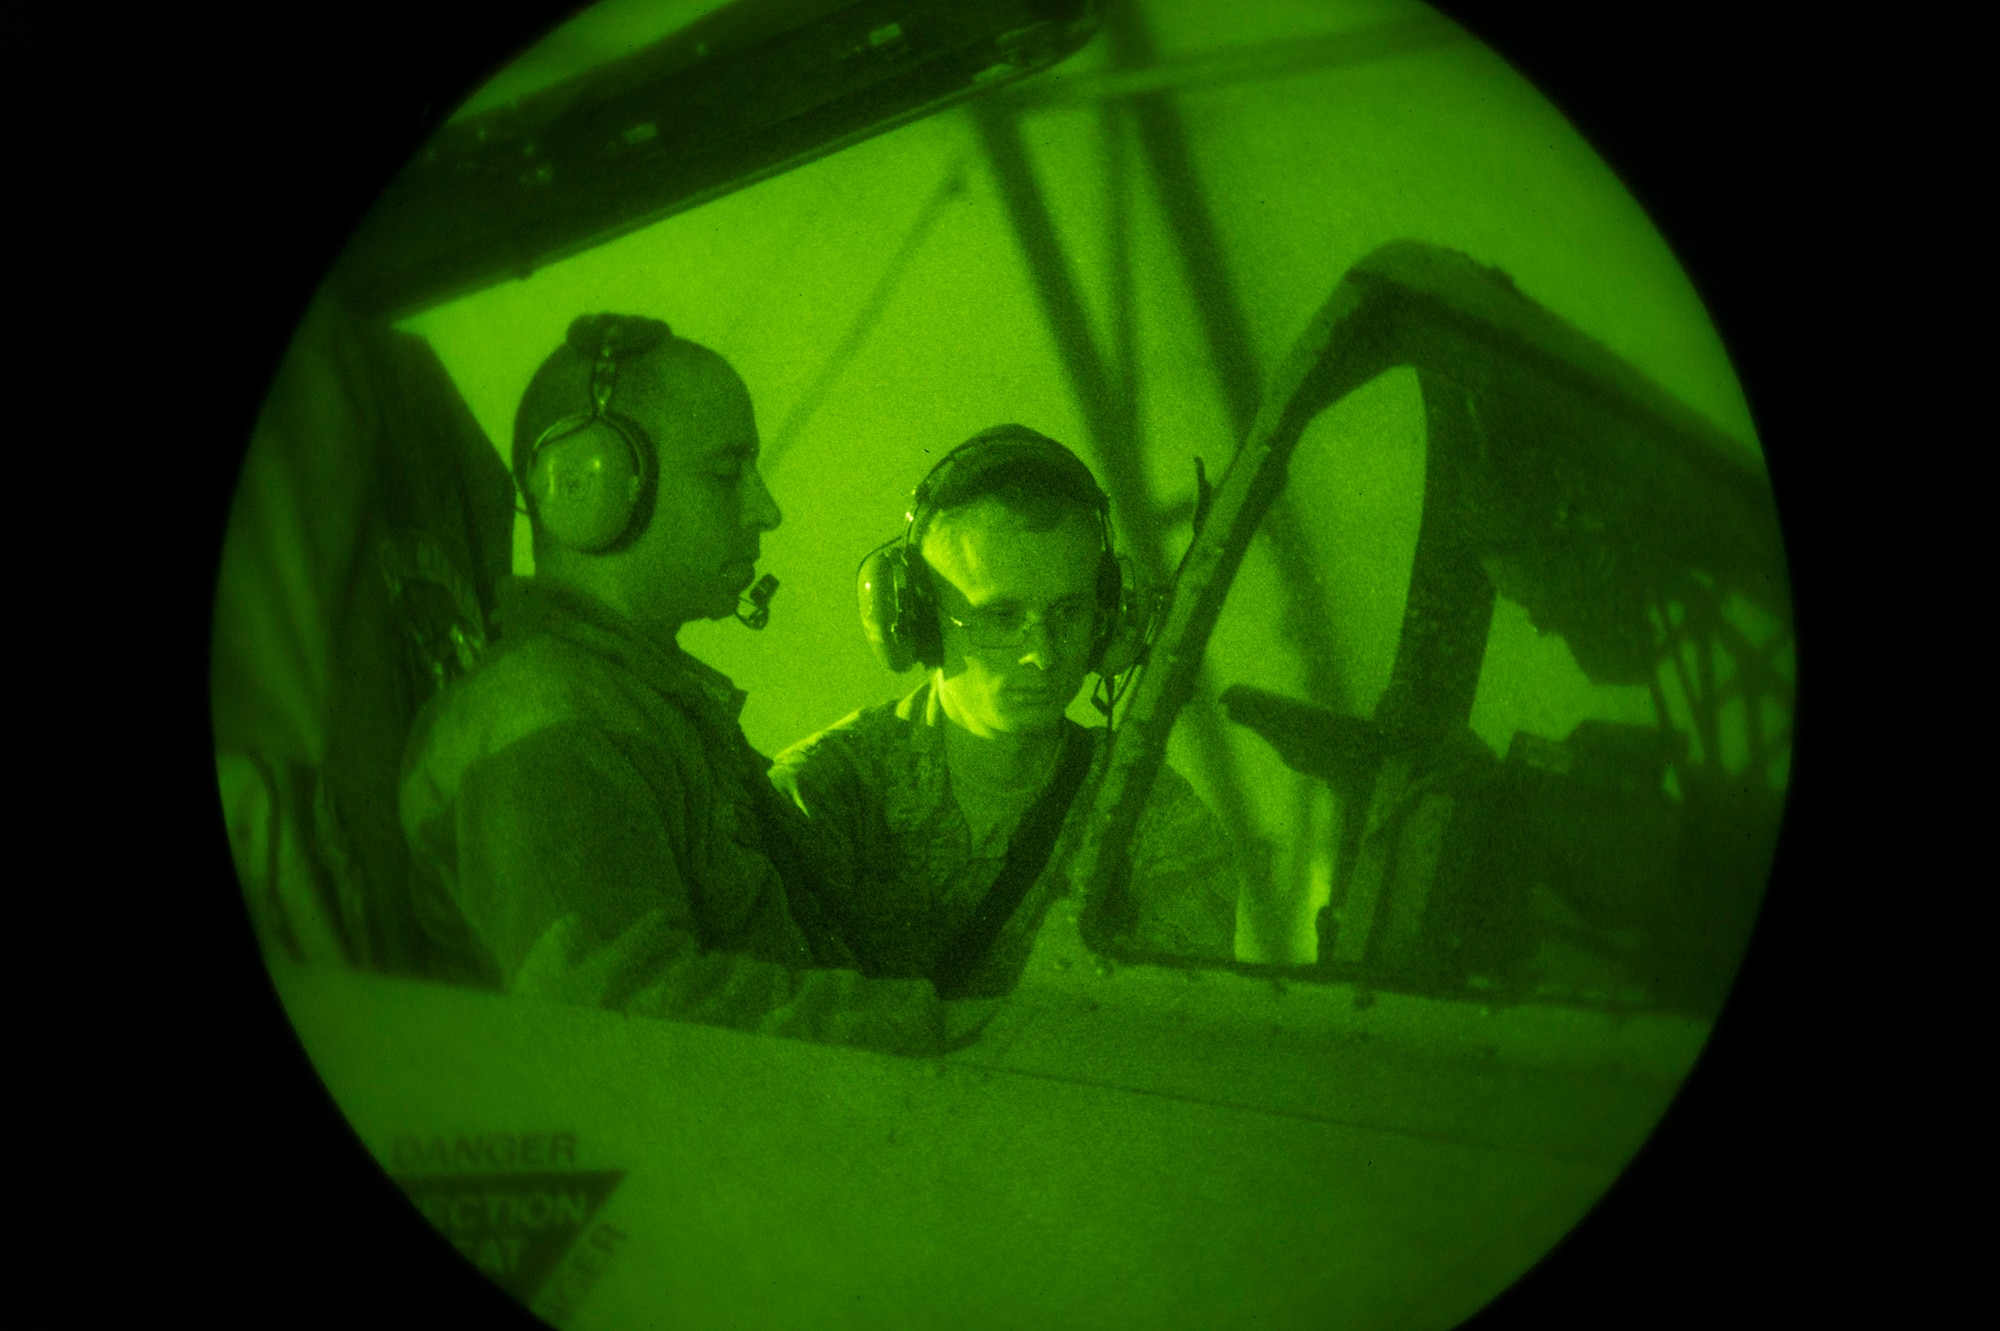 Staff Sgt. Josh Christy, left, and Senior Airman Hunter Warren, 74th Aircraft Maintenance Unit avionics specialists, check an A-10C Thunderbolt II’s radar emissions during Combat Shield, Dec. 5, 2016, at Moody Air Force Base, Ga. After the weeklong evaluation, Maj. Mike Chavannes, the CS mission director assigned to the 53d Electronic War Group, Eglin AFB, Fla., said Moody’s aircraft are combat ready with proficient primary threat detection systems and have the ability to successfully detect incoming enemy threats. (U.S. Air Force photo by Airman 1st Class Greg Nash)